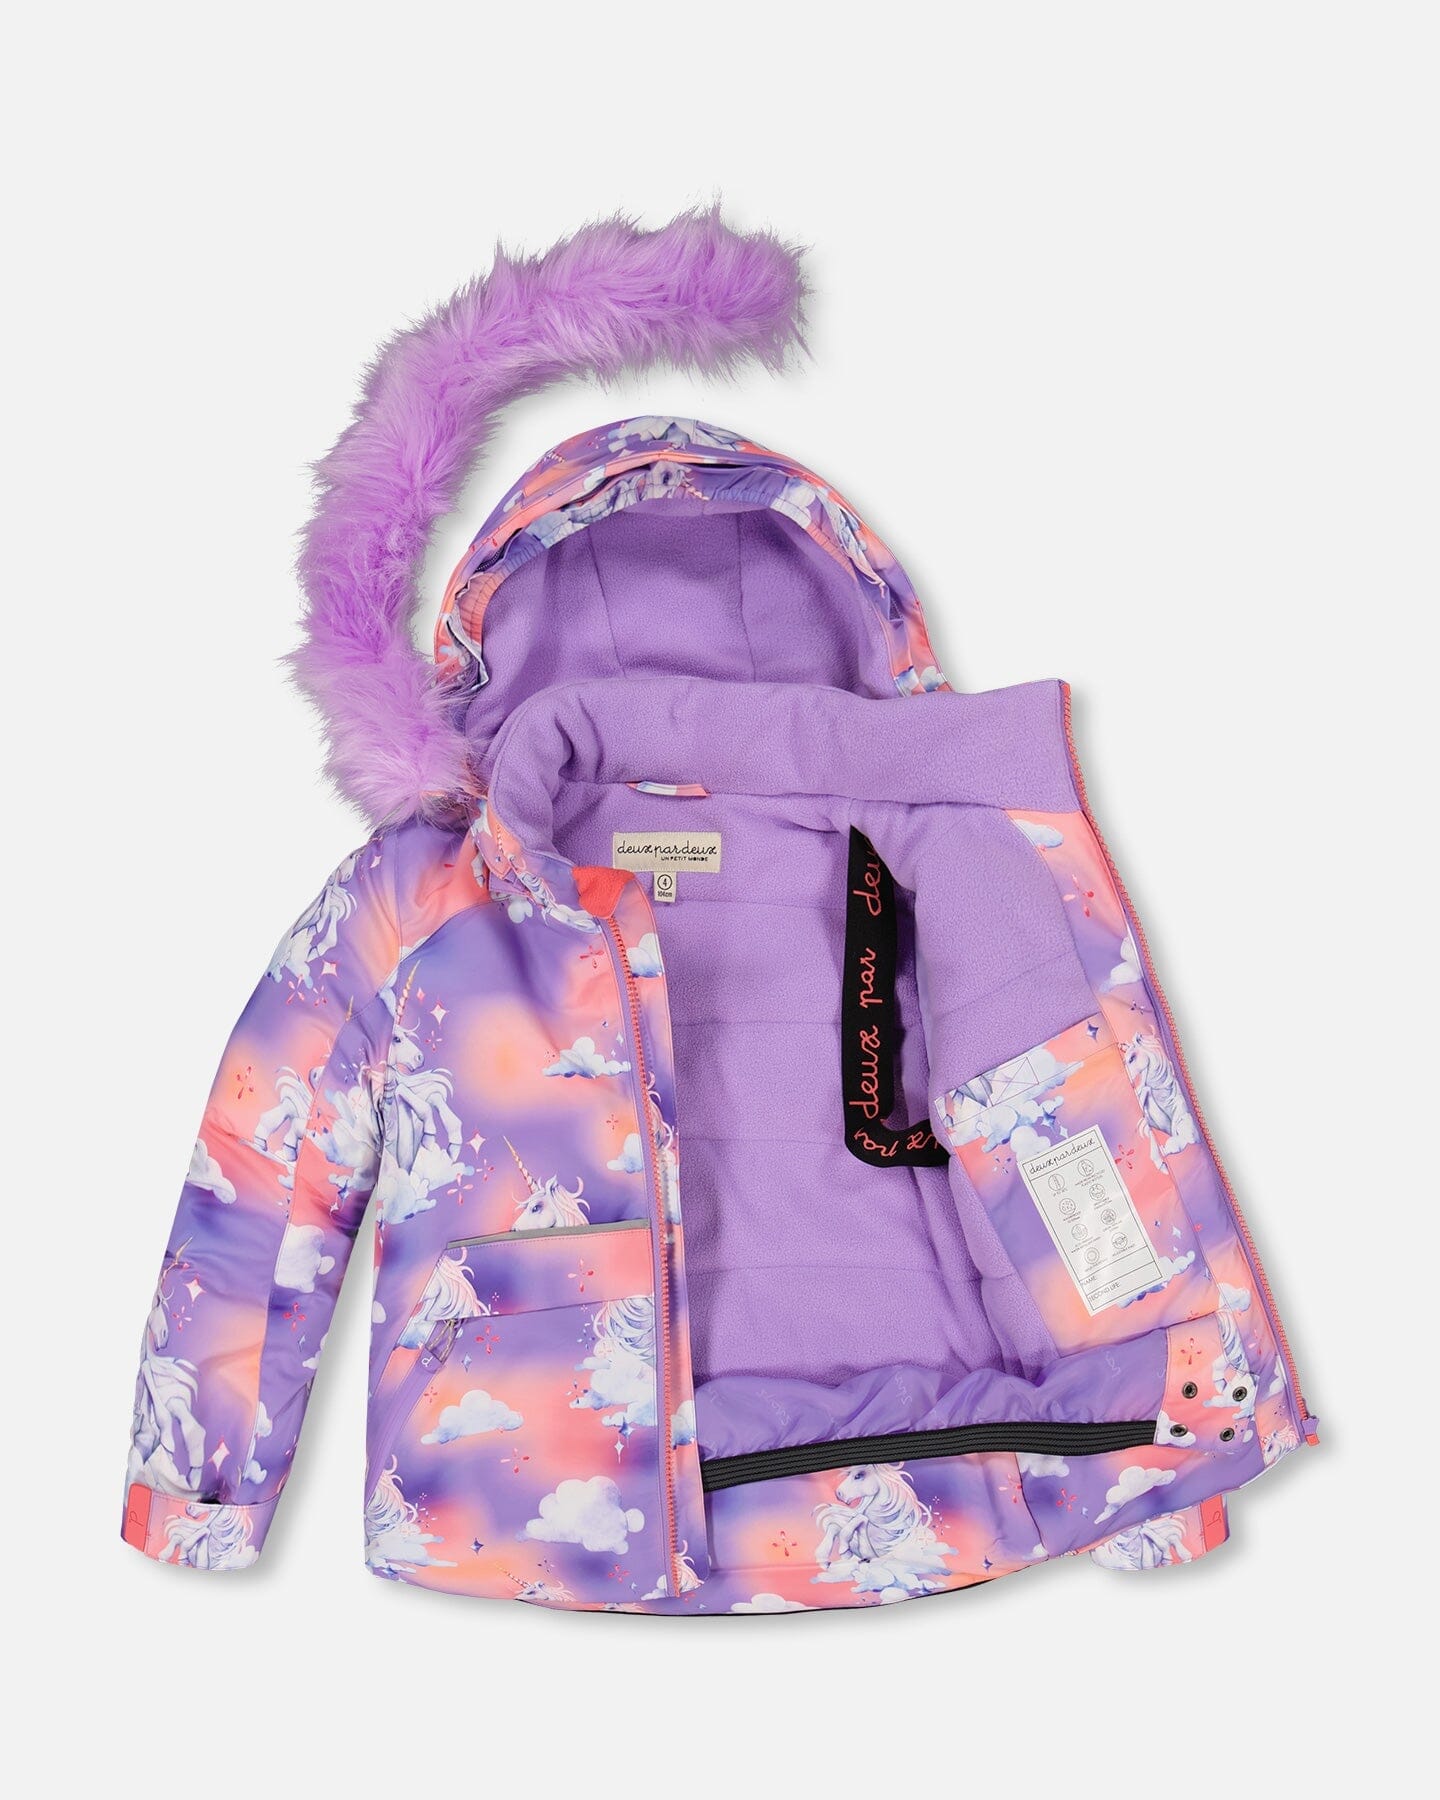 Two Piece Snowsuit Unicorns In The Clouds Print With Lavender Pant - F10D802_530